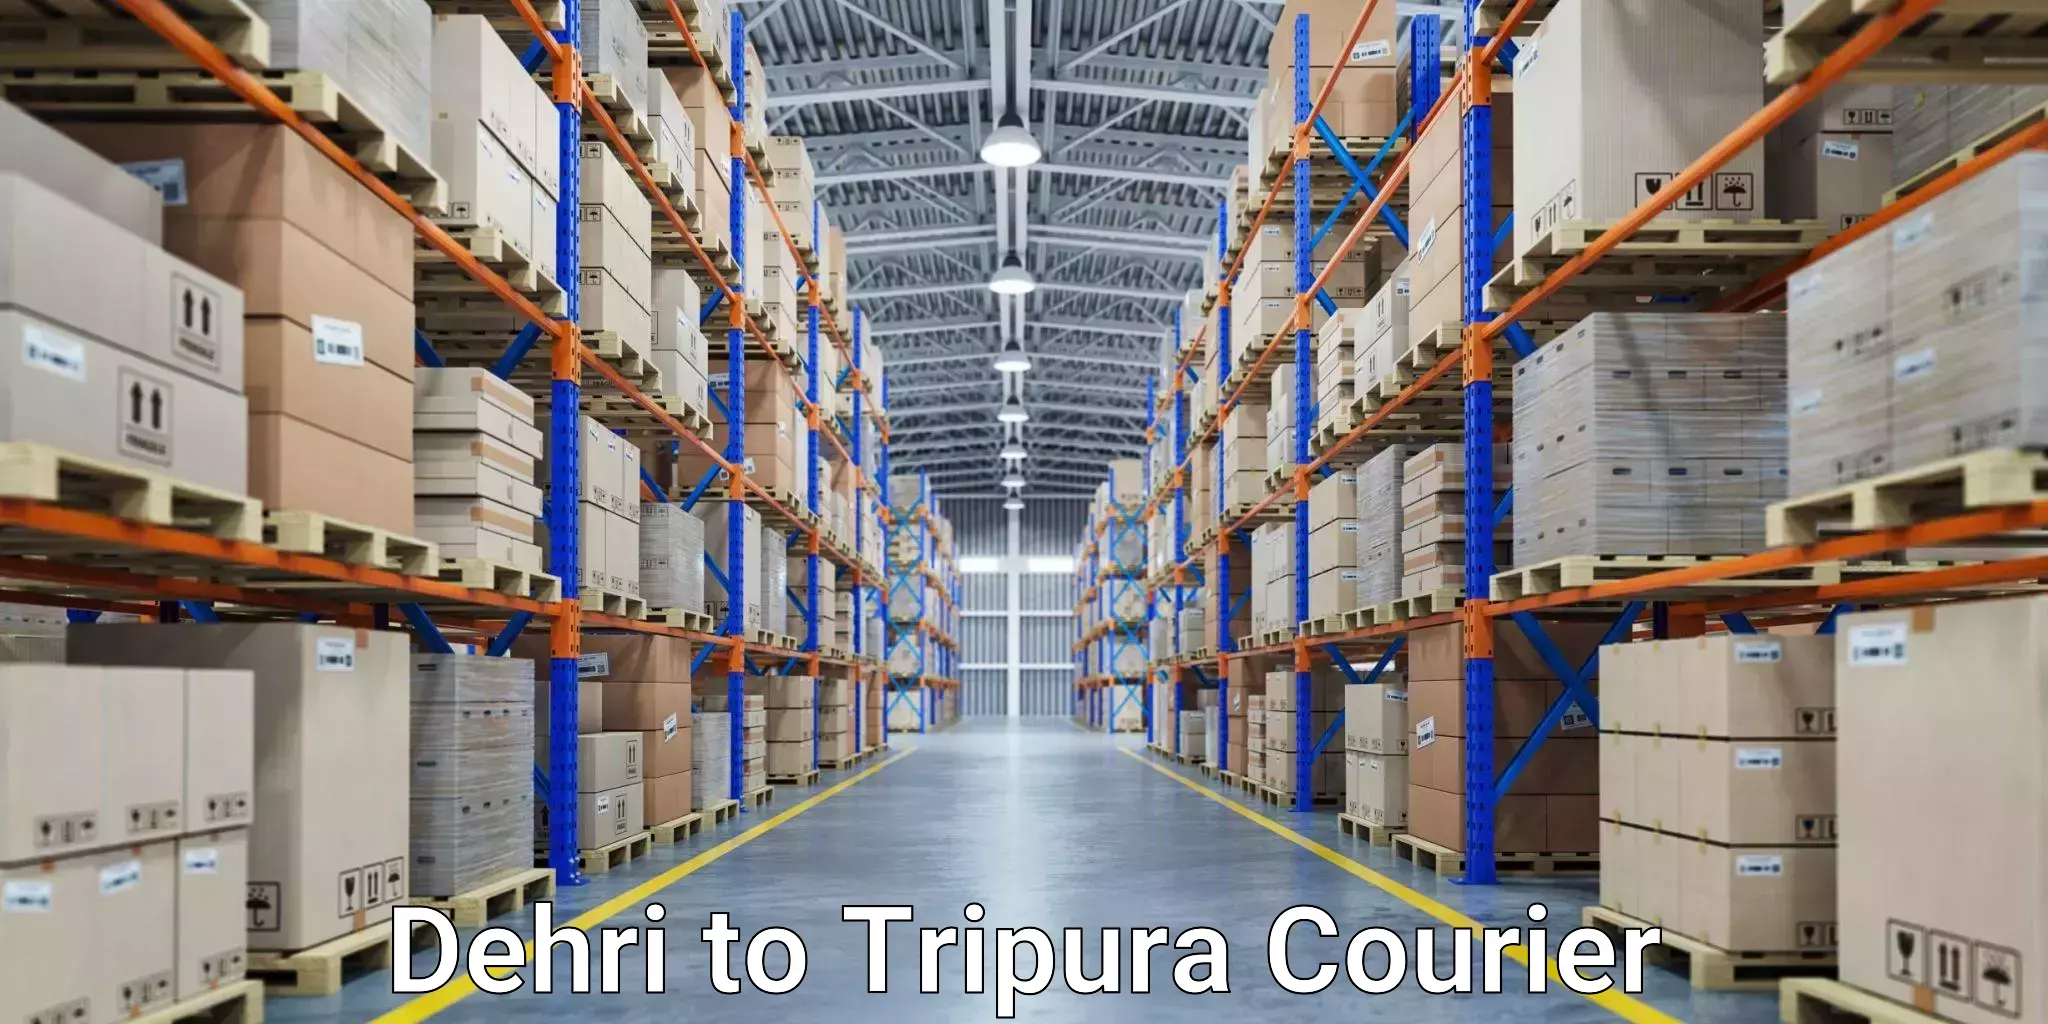 Flexible delivery schedules in Dehri to Udaipur Tripura